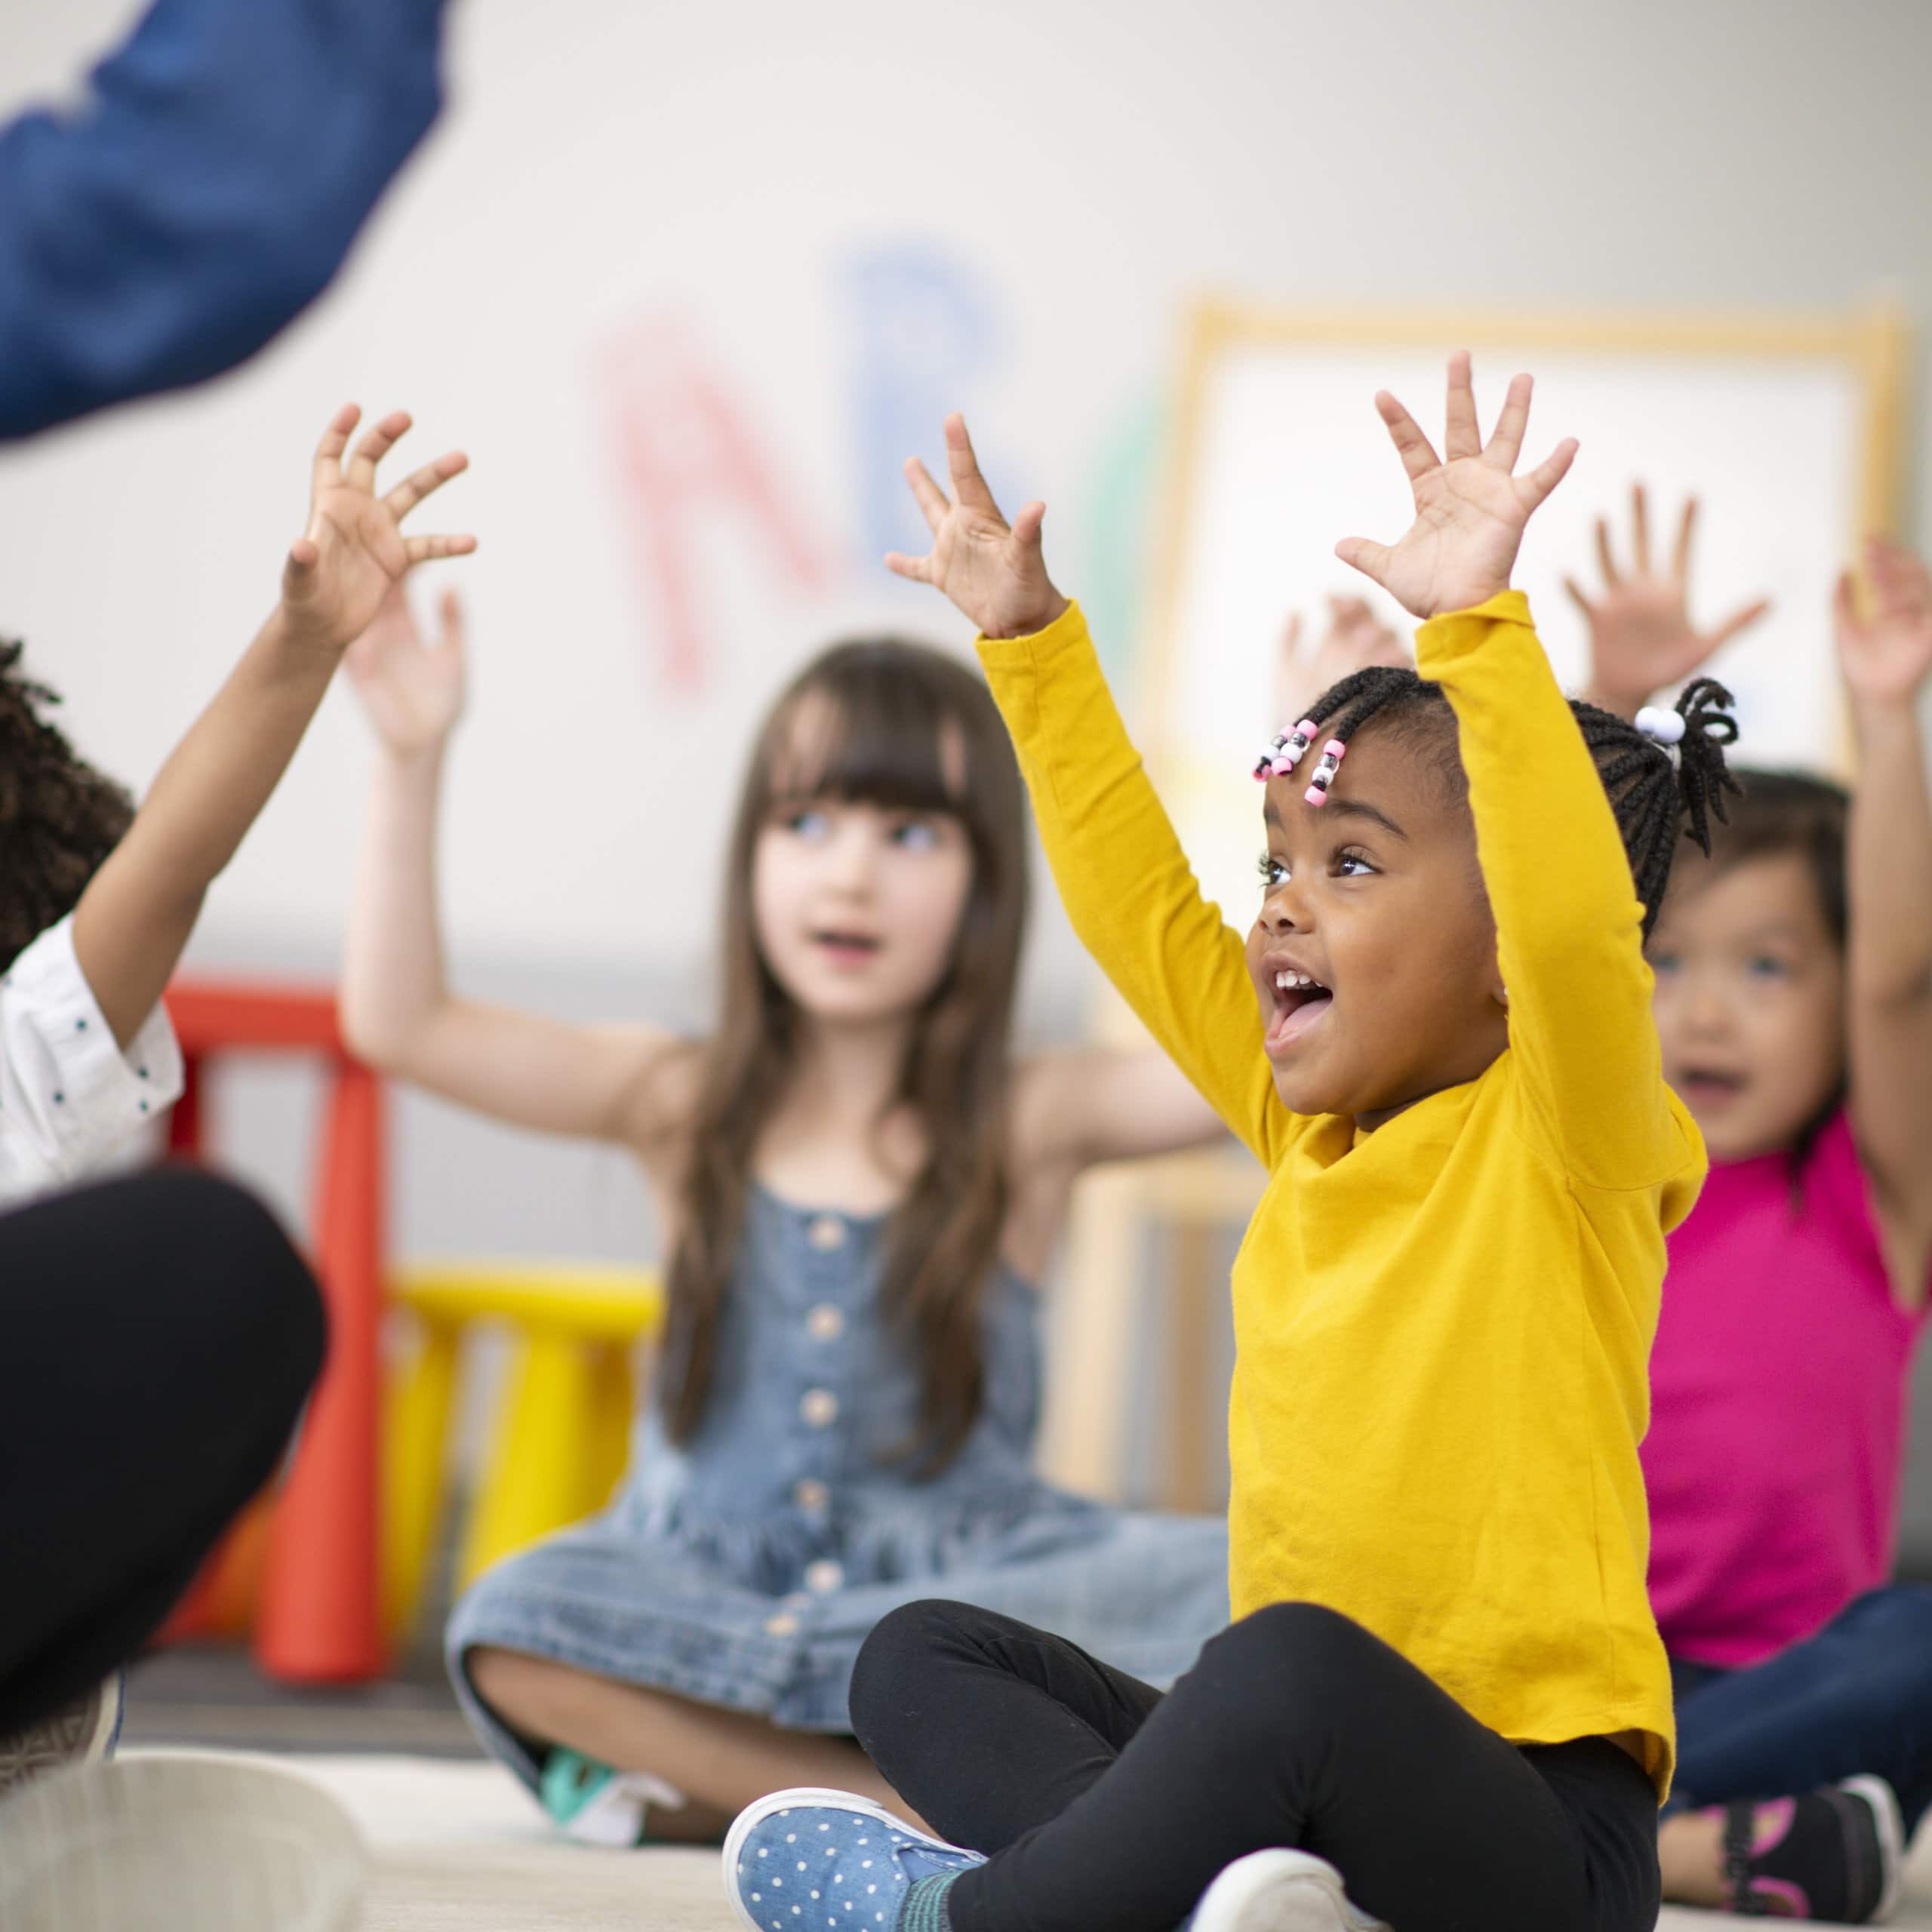 A multi-ethnic group of preschool students is sitting with their legs crossed on the floor in their classroom. The mixed-race female teacher is sitting on the floor facing the children. The happy kids are smiling and following the teacher's instructions. They have their arms raised in the air.